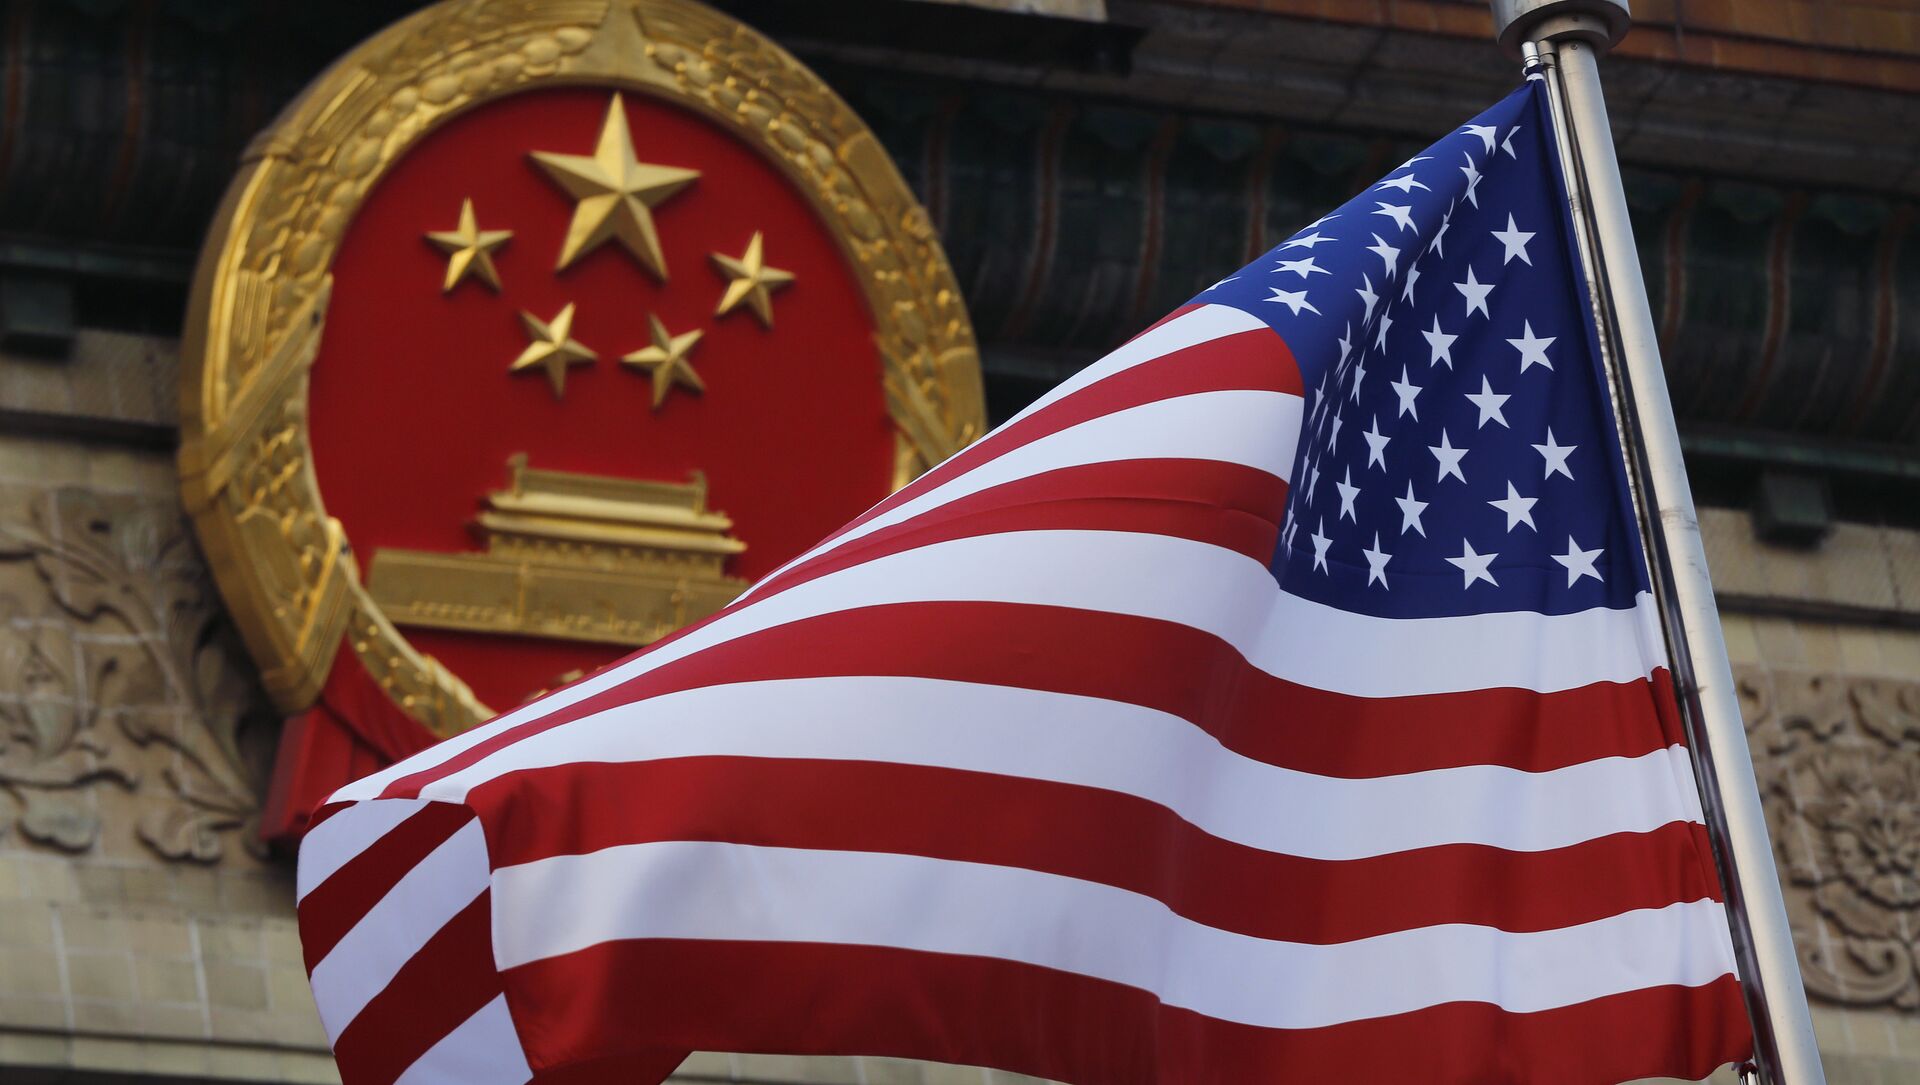 FILE - In this Nov. 9, 2017 file photo, an American flag is flown next to the Chinese national emblem during a welcome ceremony for visiting U.S. President Donald Trump outside the Great Hall of the People in Beijing - Sputnik Moldova-România, 1920, 14.06.2021